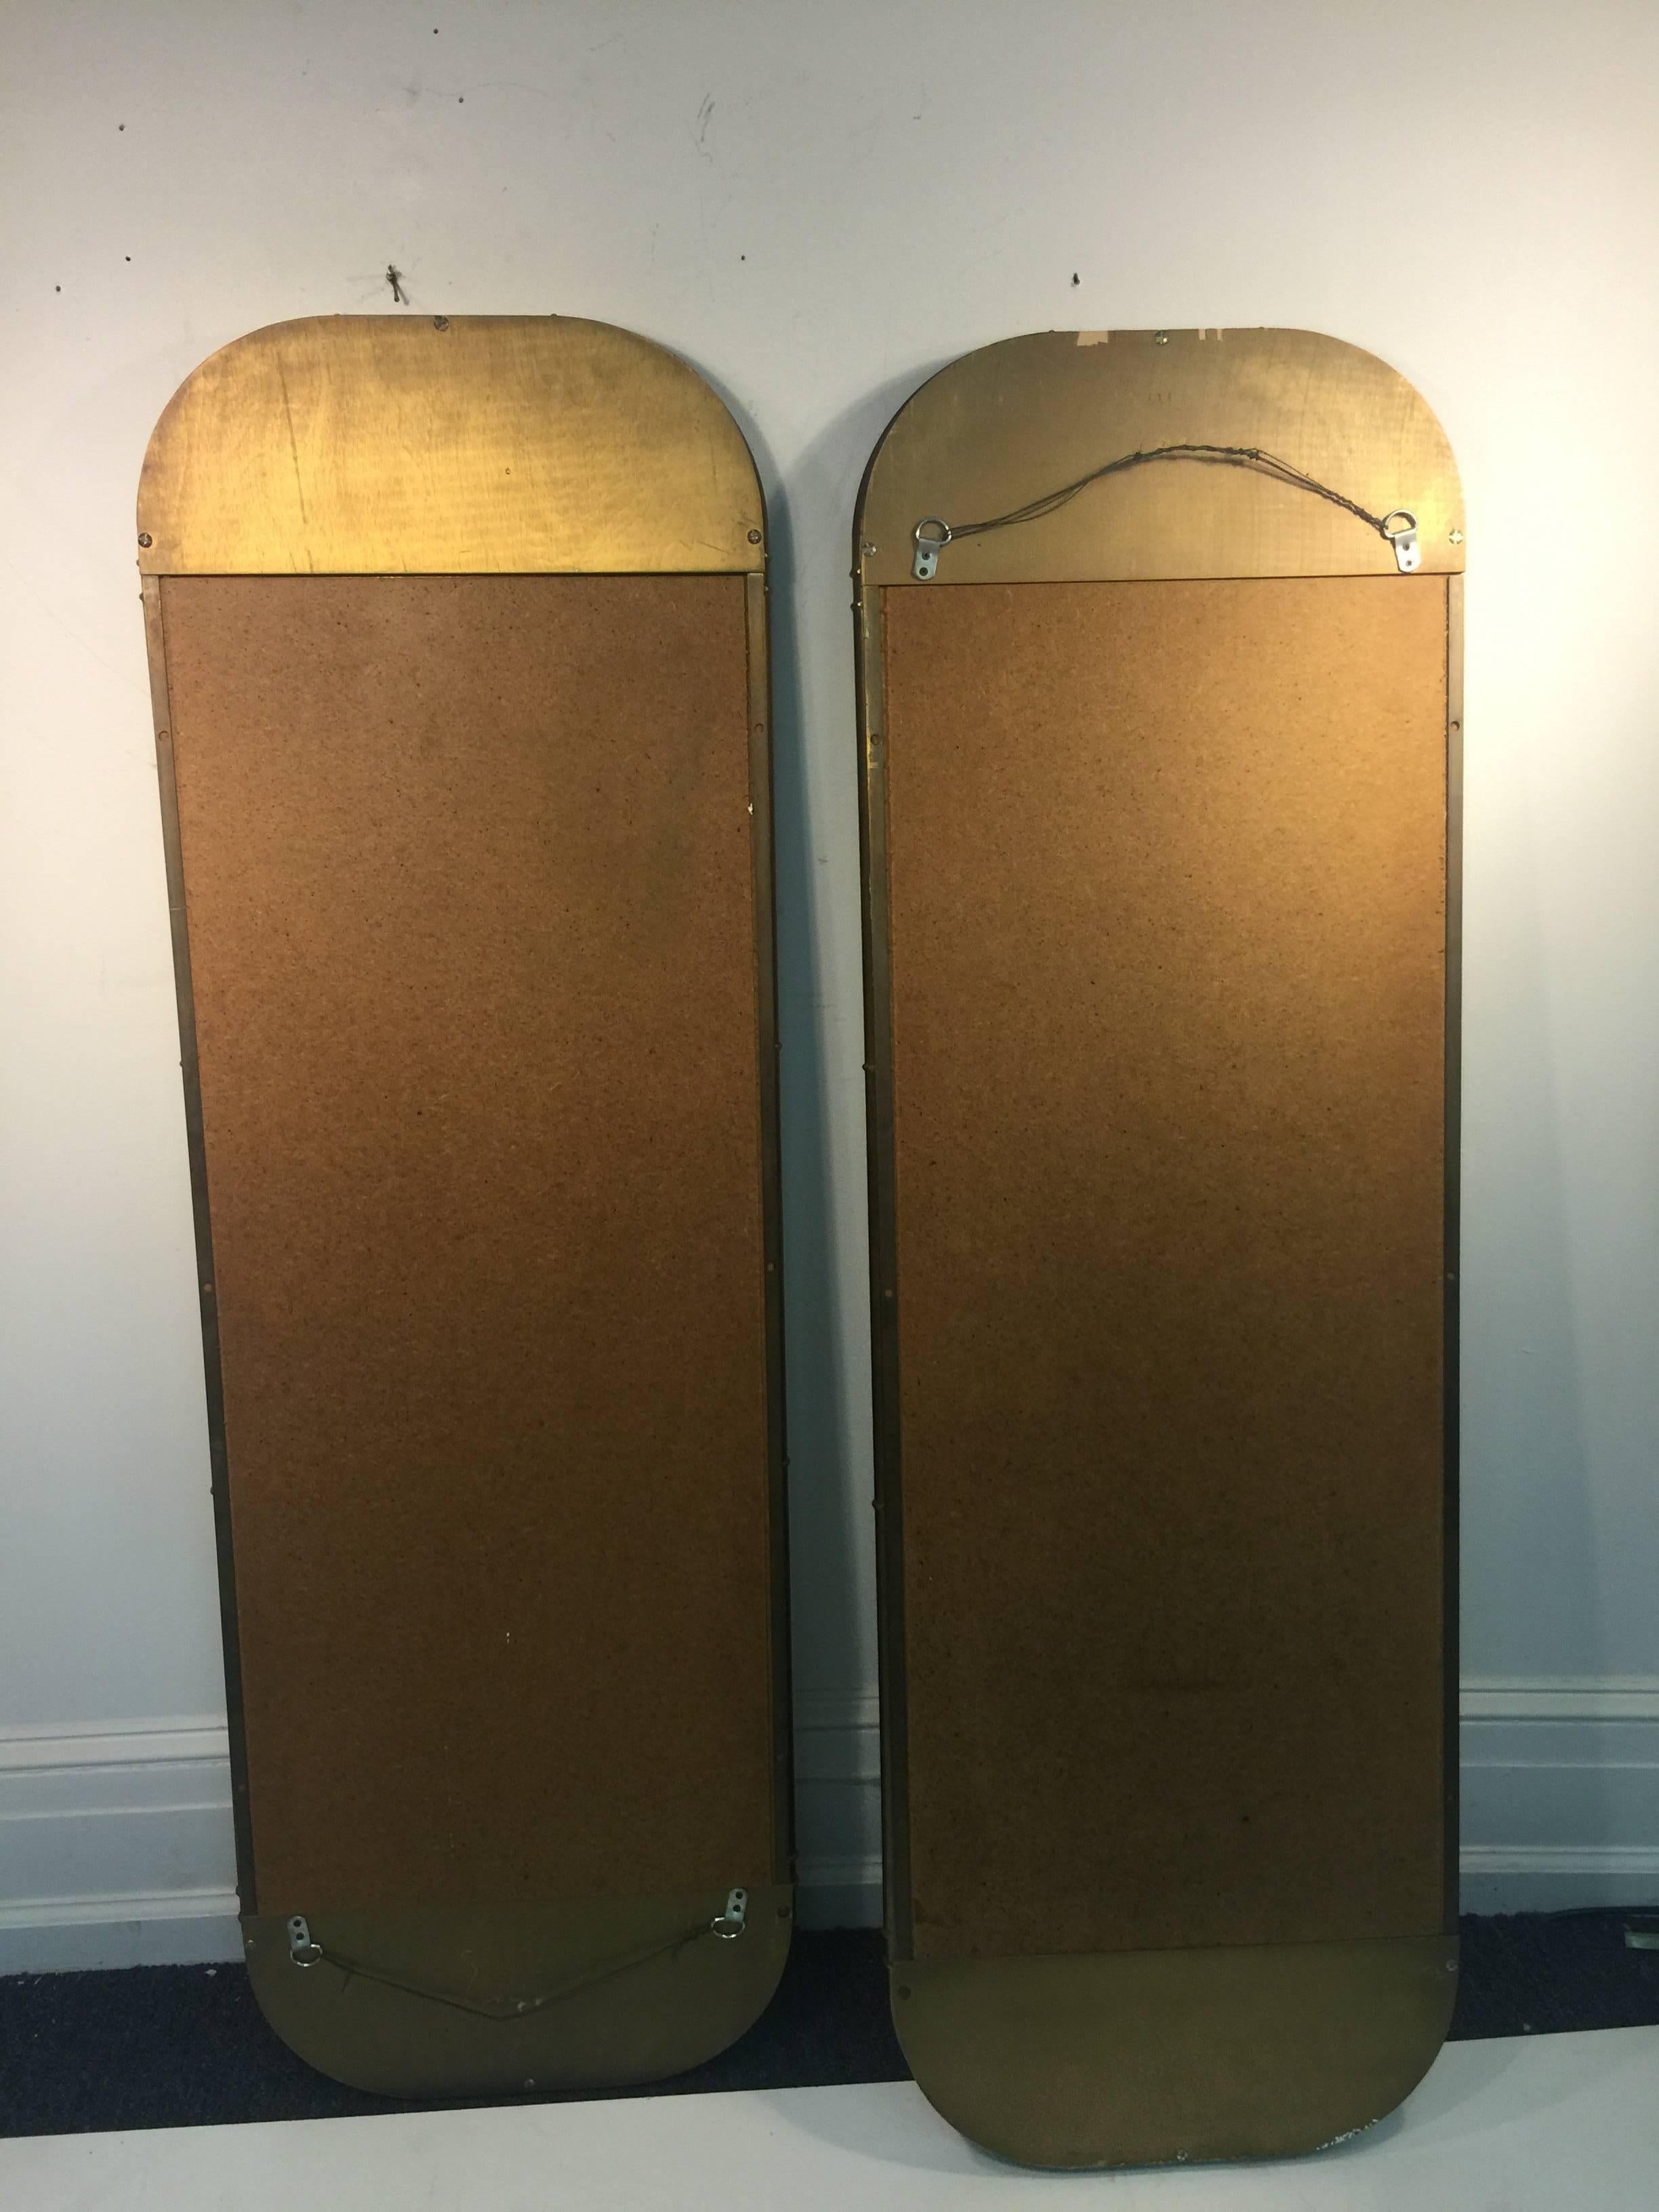 Magnificent Pair of Mastercraft Full-Length Brass Oblong Wall Mirrors 1